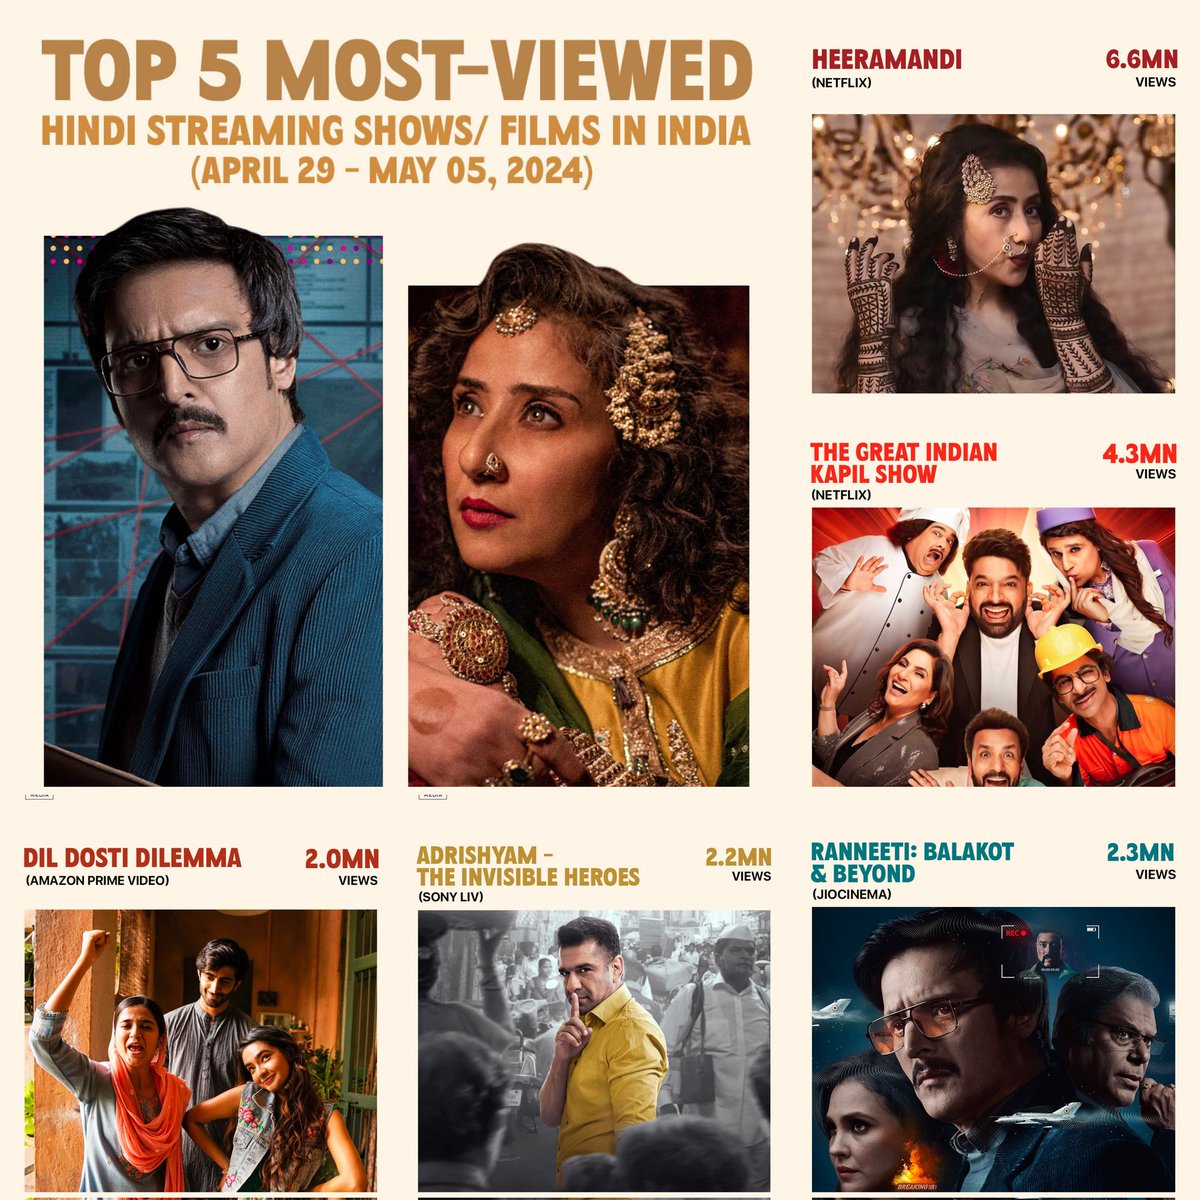 From 'Heeramandi' to 'Dil Dosti Dilemma', here's a list of the most-viewed shows and movies from the Indian streaming space of last week. In collaboration with @ormaxmedia. #FilmCompanion